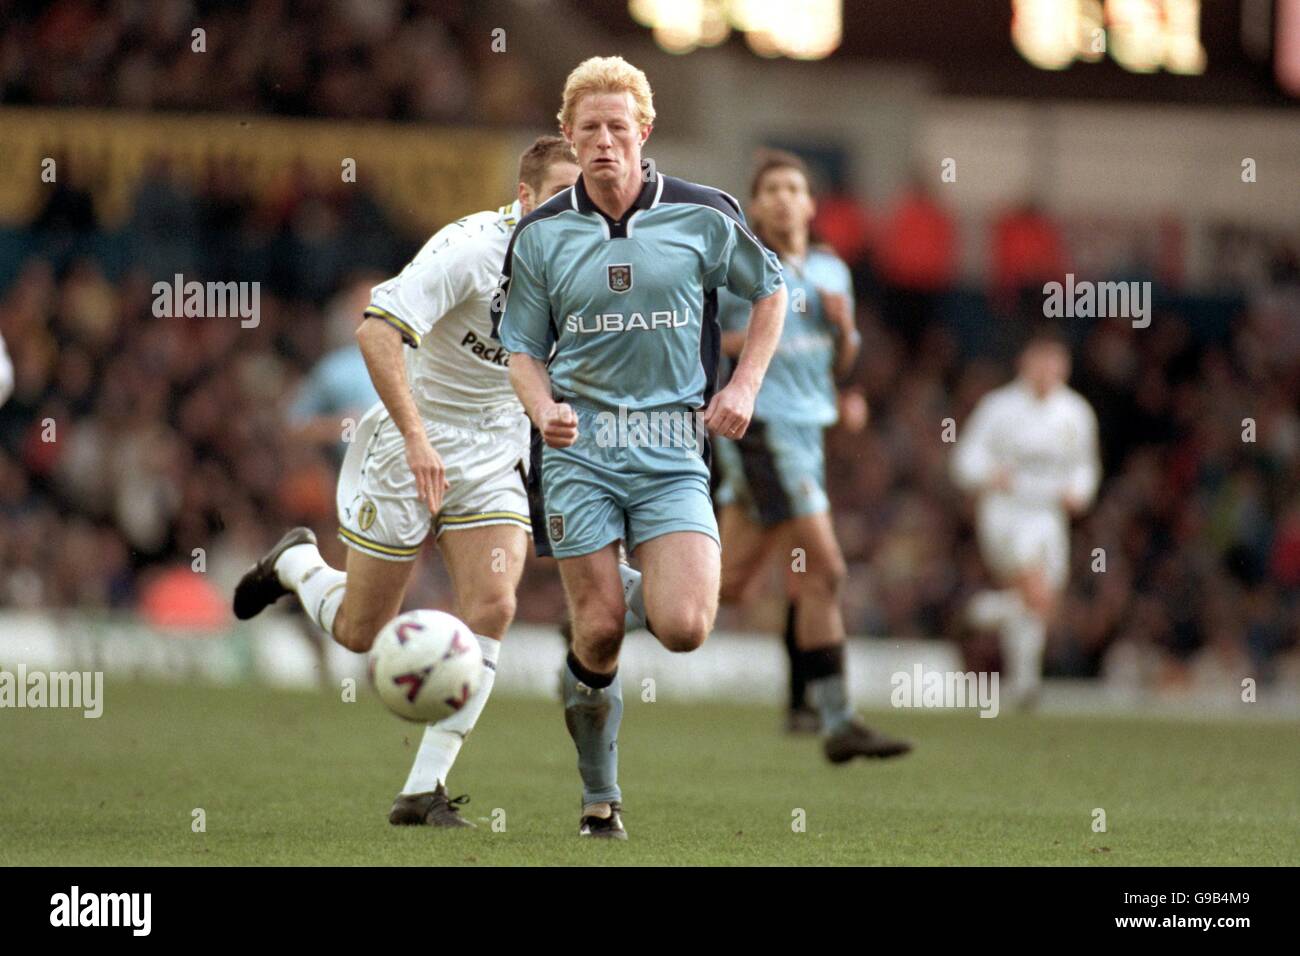 Football - FA Carling Premiership - Leeds United / Coventry City. Colin Hendry, Coventry City Banque D'Images